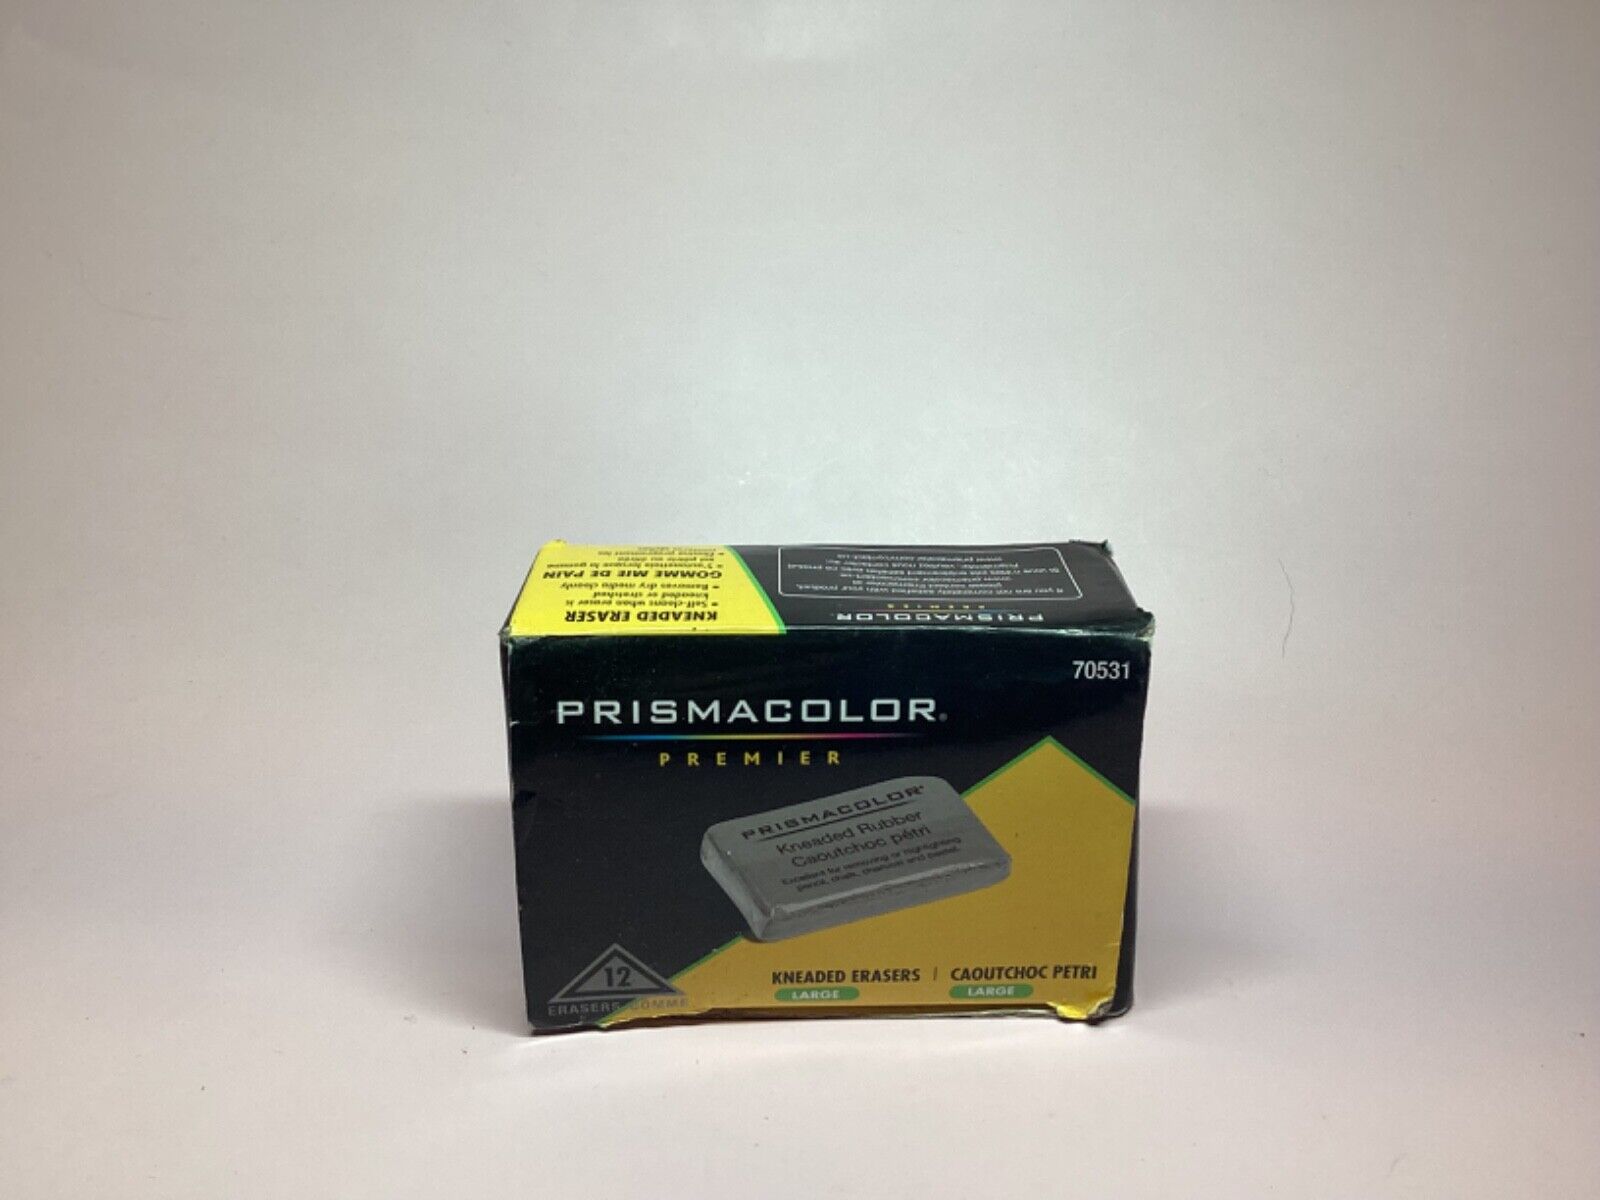 prismacolor premier kneaded erasers large 10 pcs in box ❤️